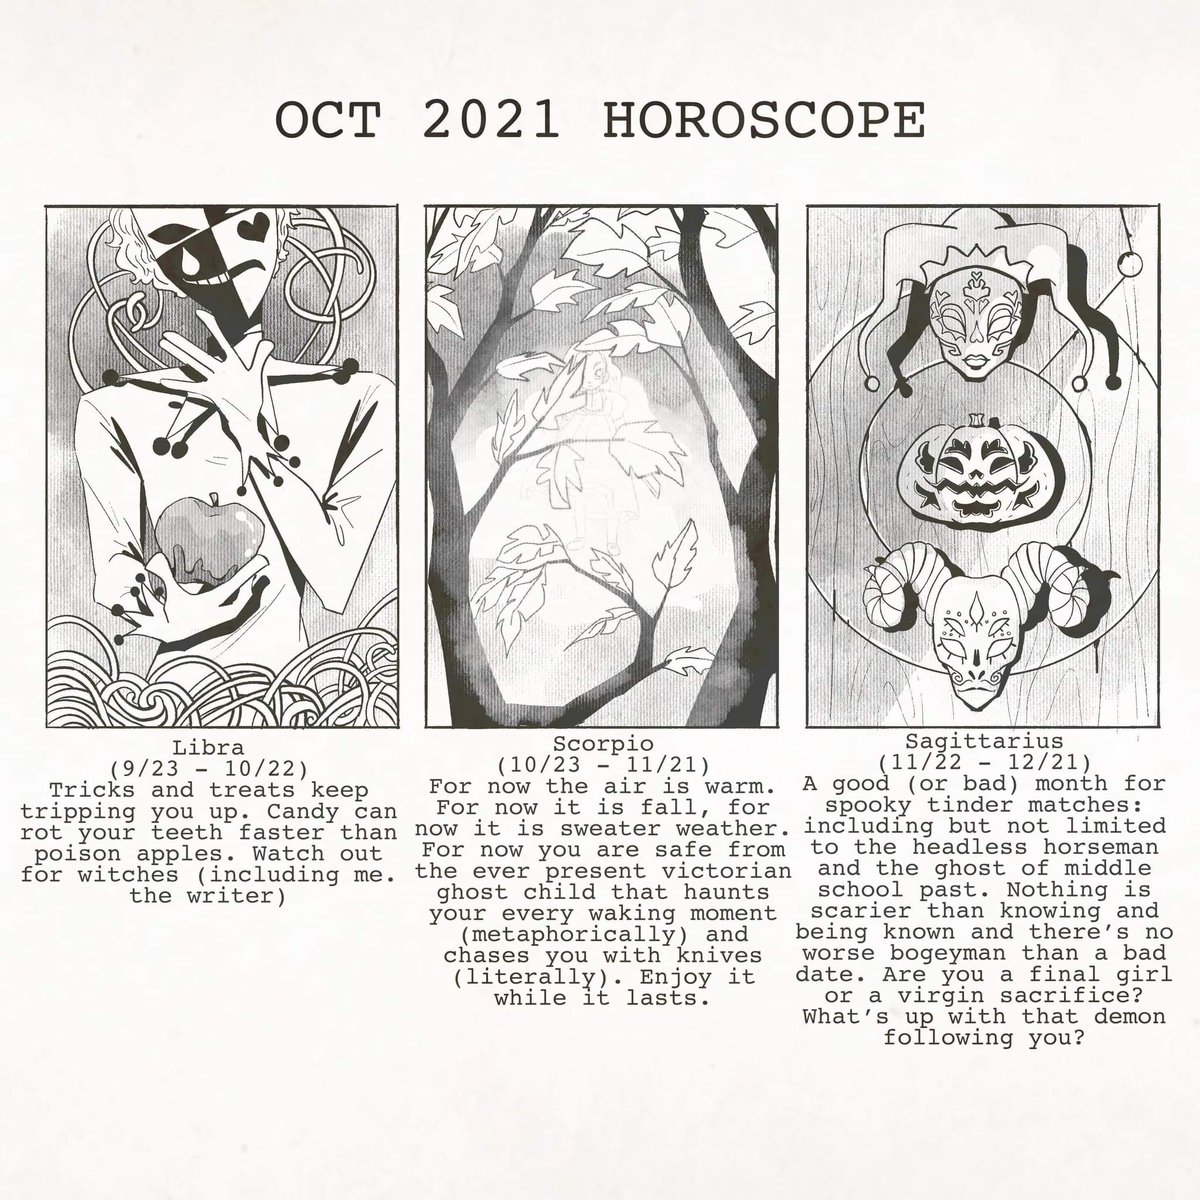 october horoscopes I did for the sublevel

(calrats secret monthly student newspaper) 